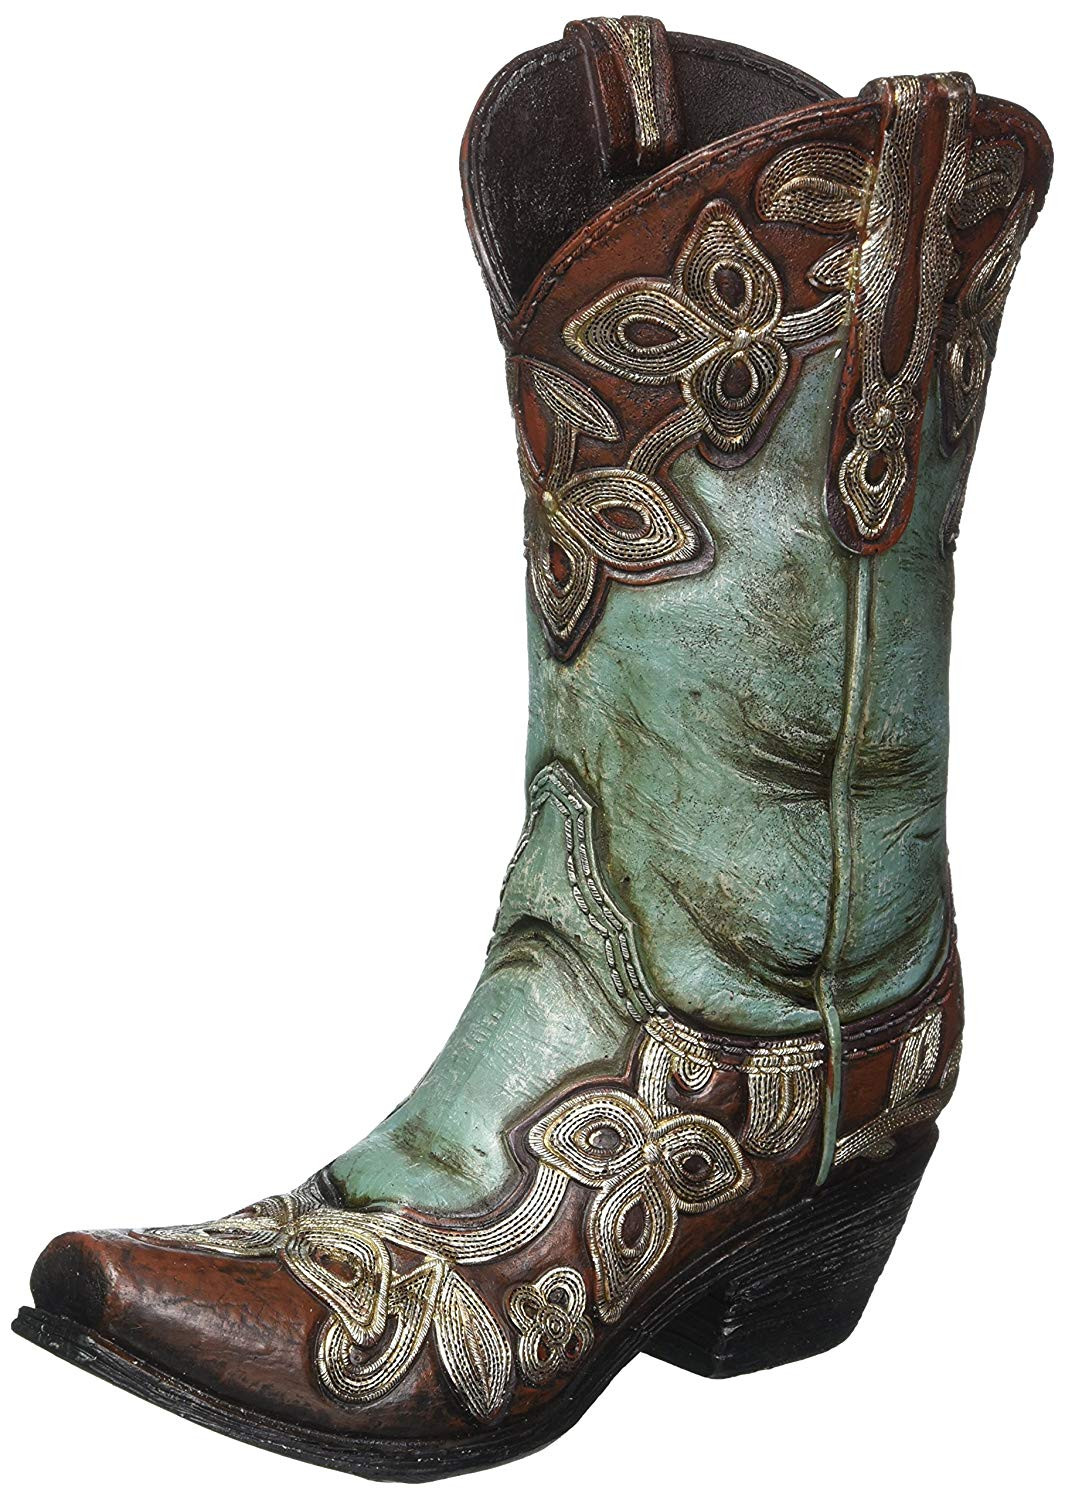 23 Recommended Resin Cowboy Boot Vase 2024 free download resin cowboy boot vase of amazon com turquoise cowgirl boot vase home kitchen regarding 917h0prmc1l sl1500